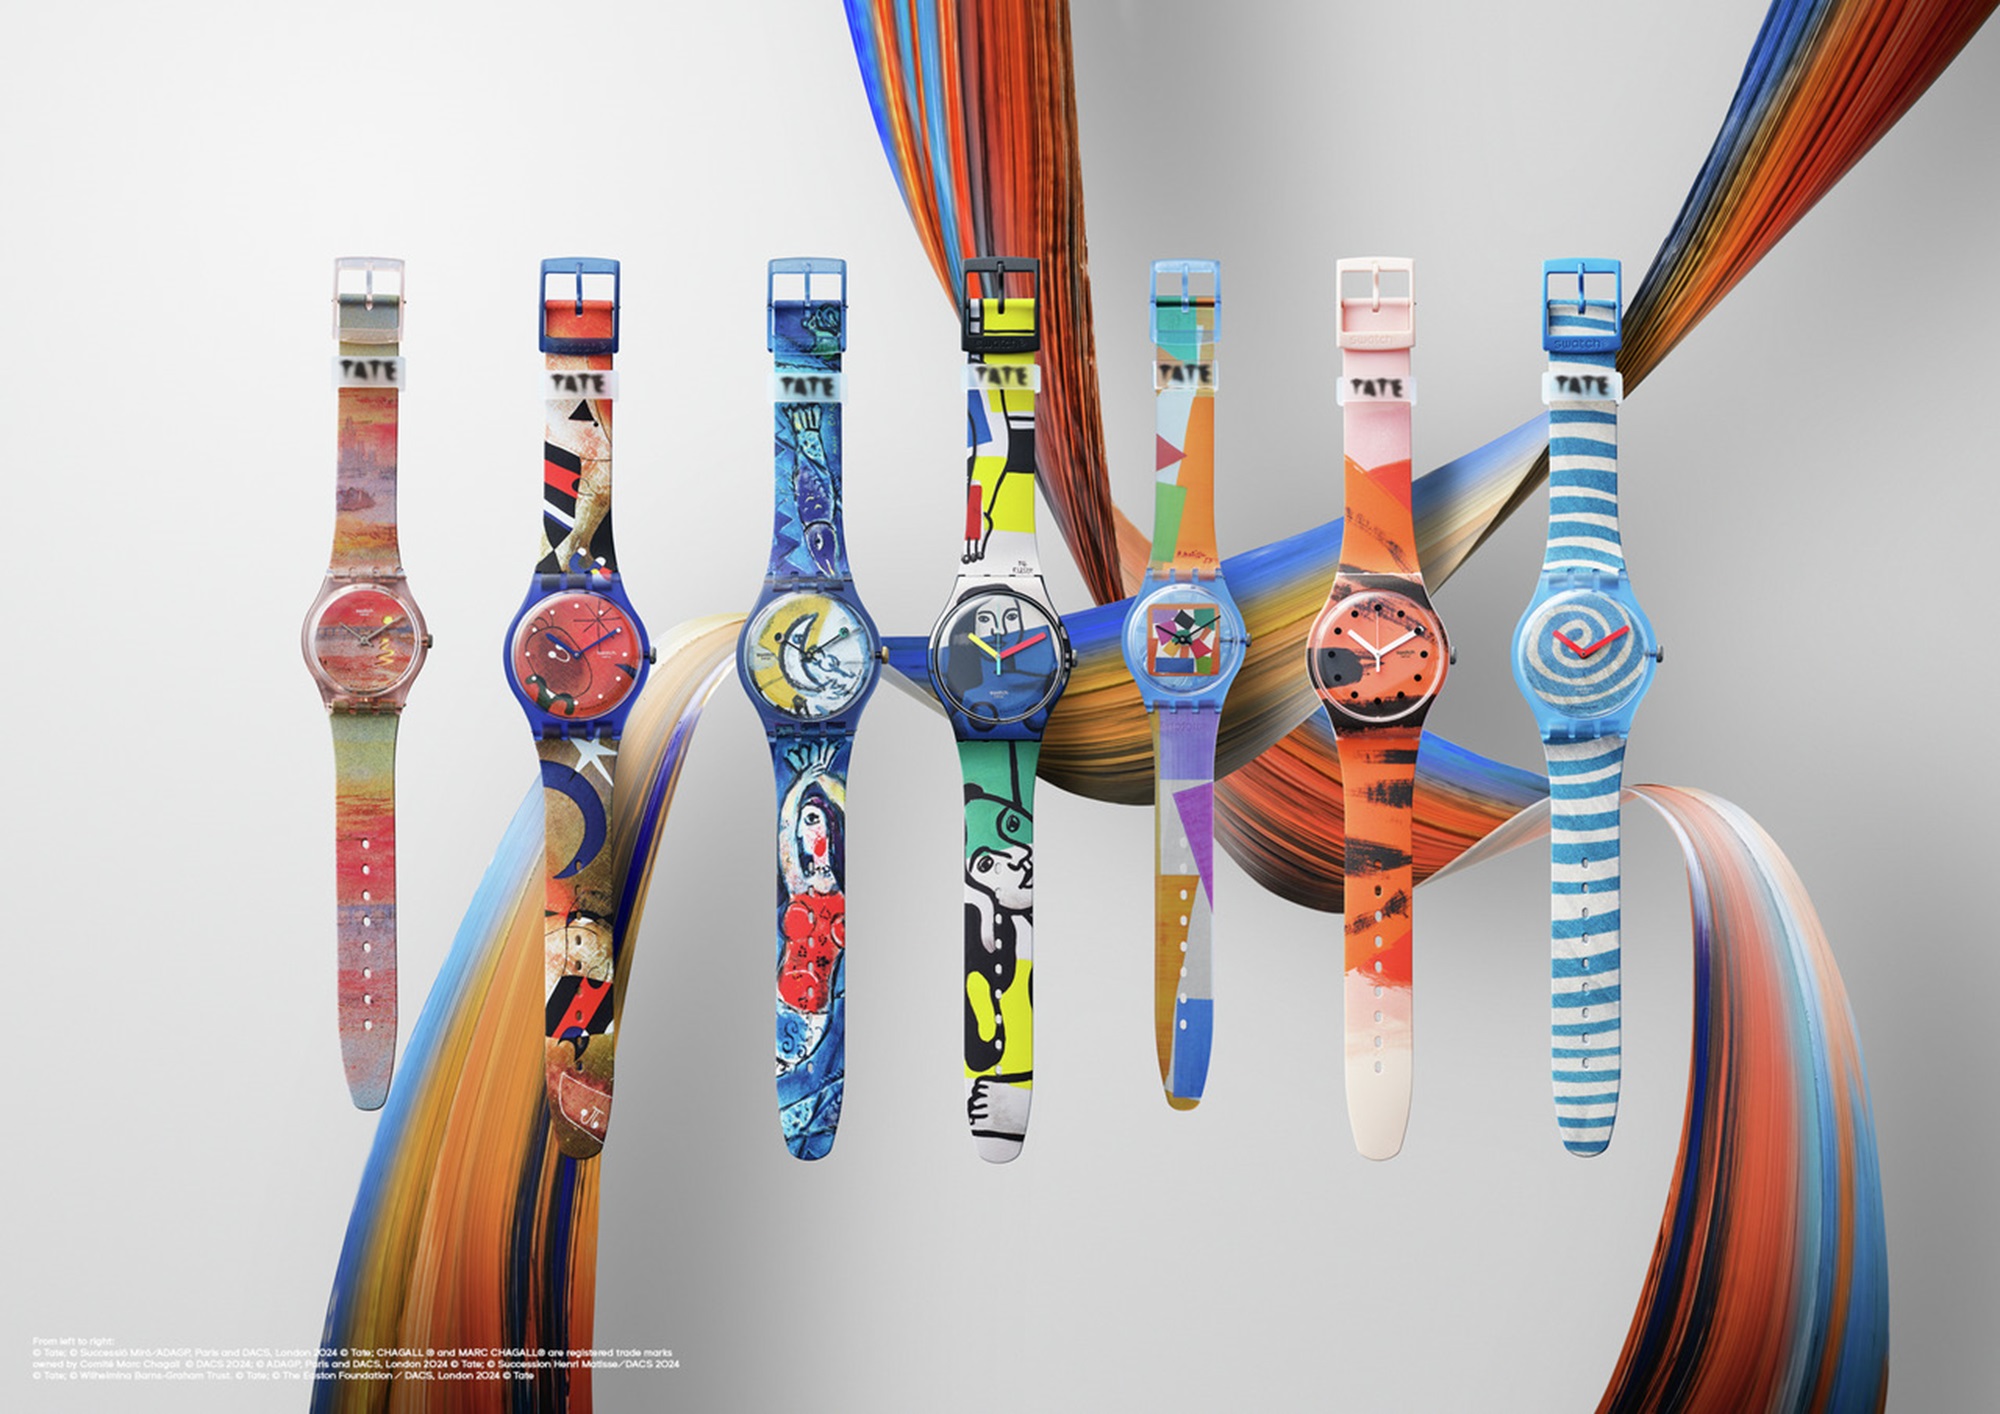 Swatch x Tate collaboration watches